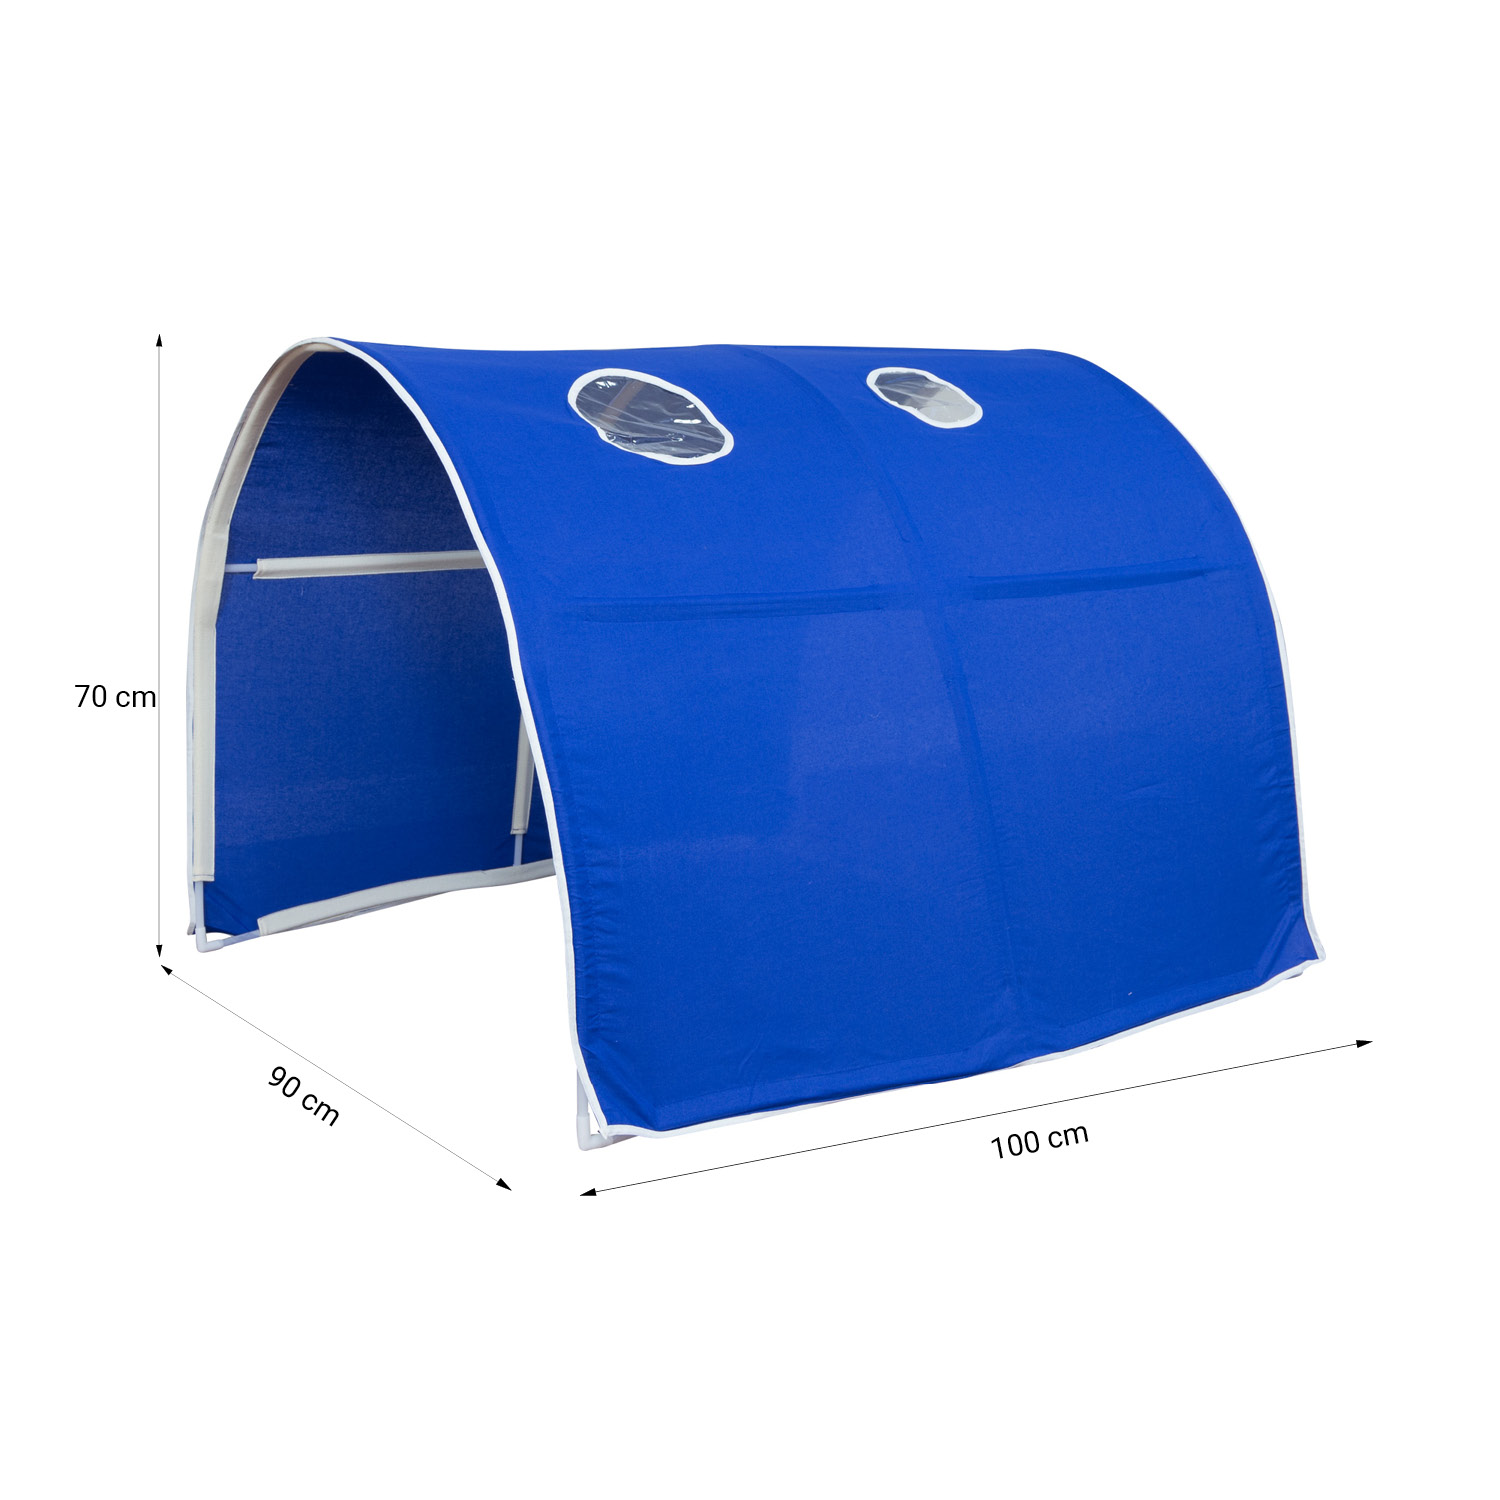 Childrens Bed Tunnel Bed Tent Bunk Bed Cabin Bed accessories blue